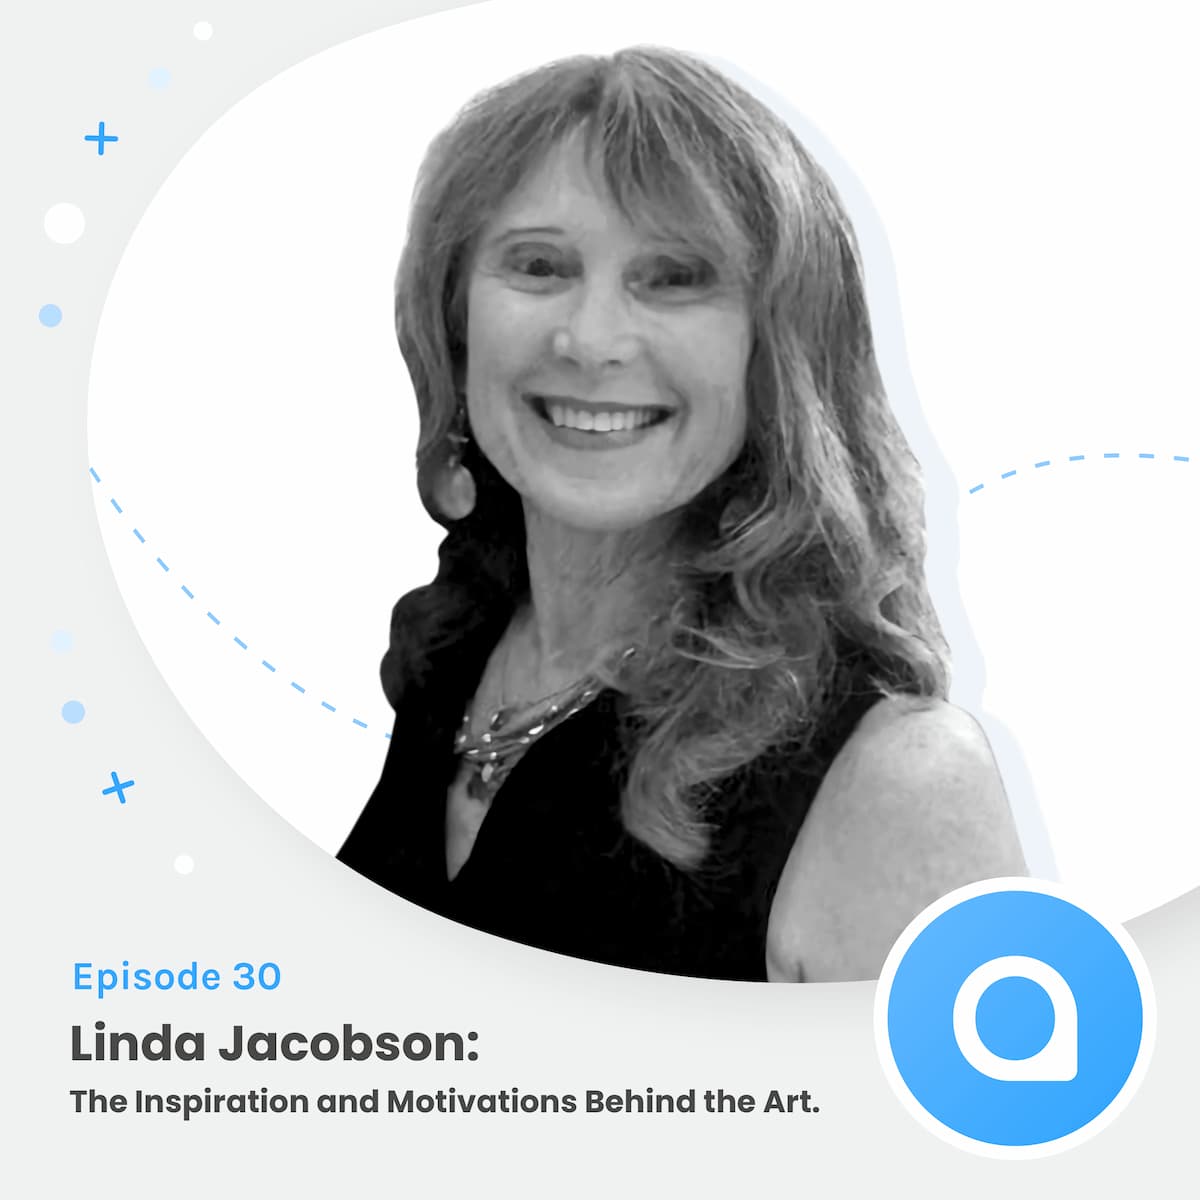 Linda Jacobson: The inspiration and motivations behind the art.